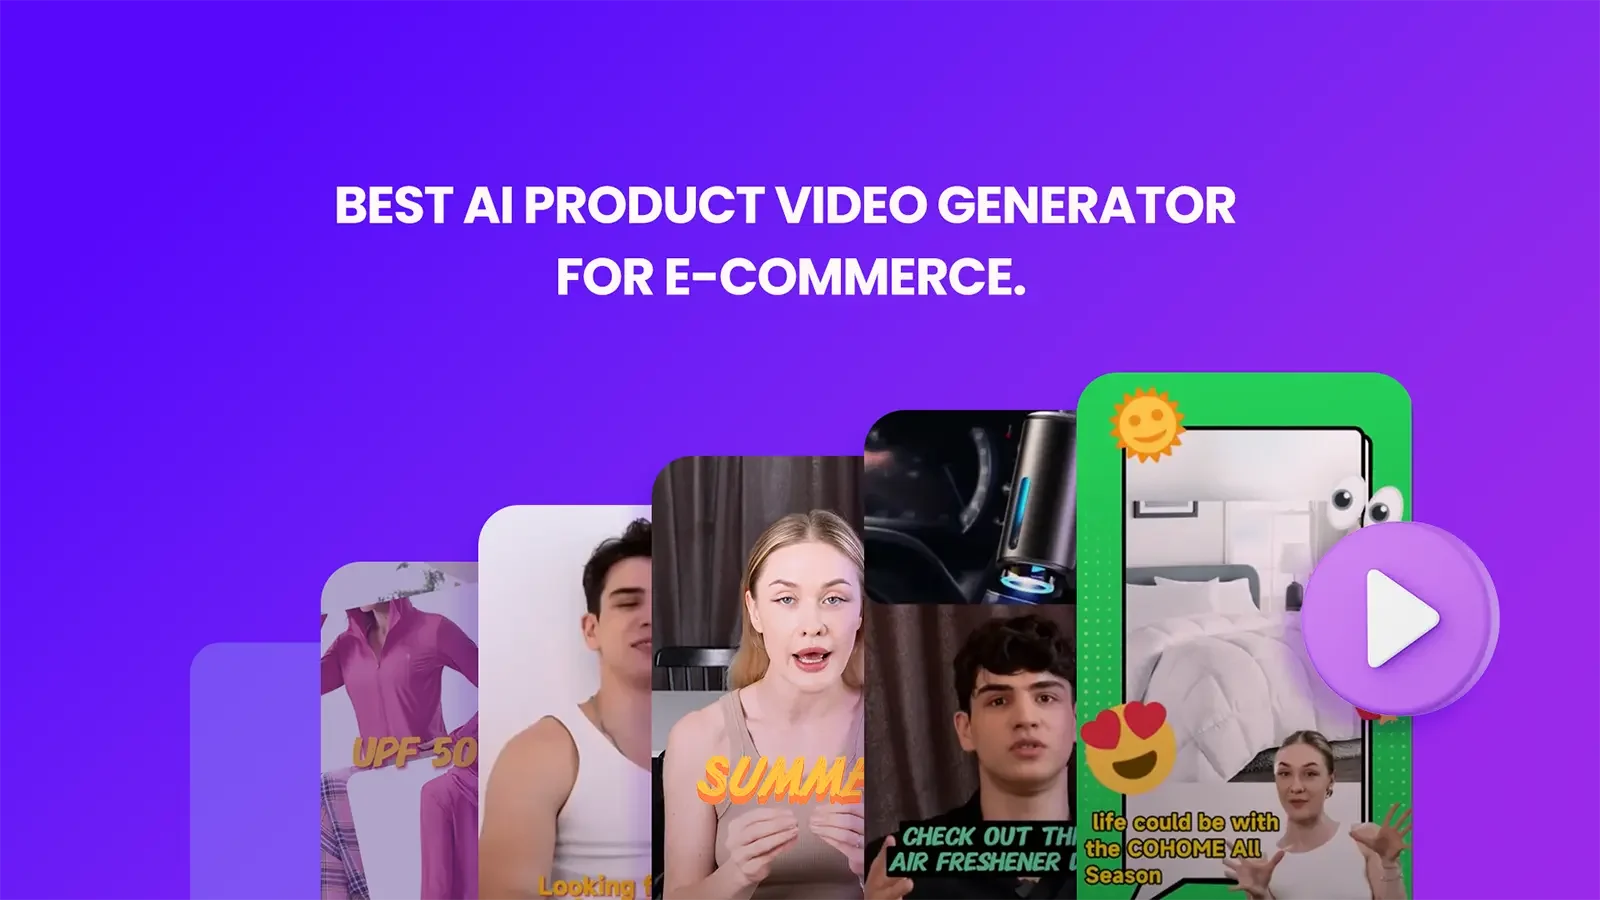 Best AI Product Video Generator for E-Commerce